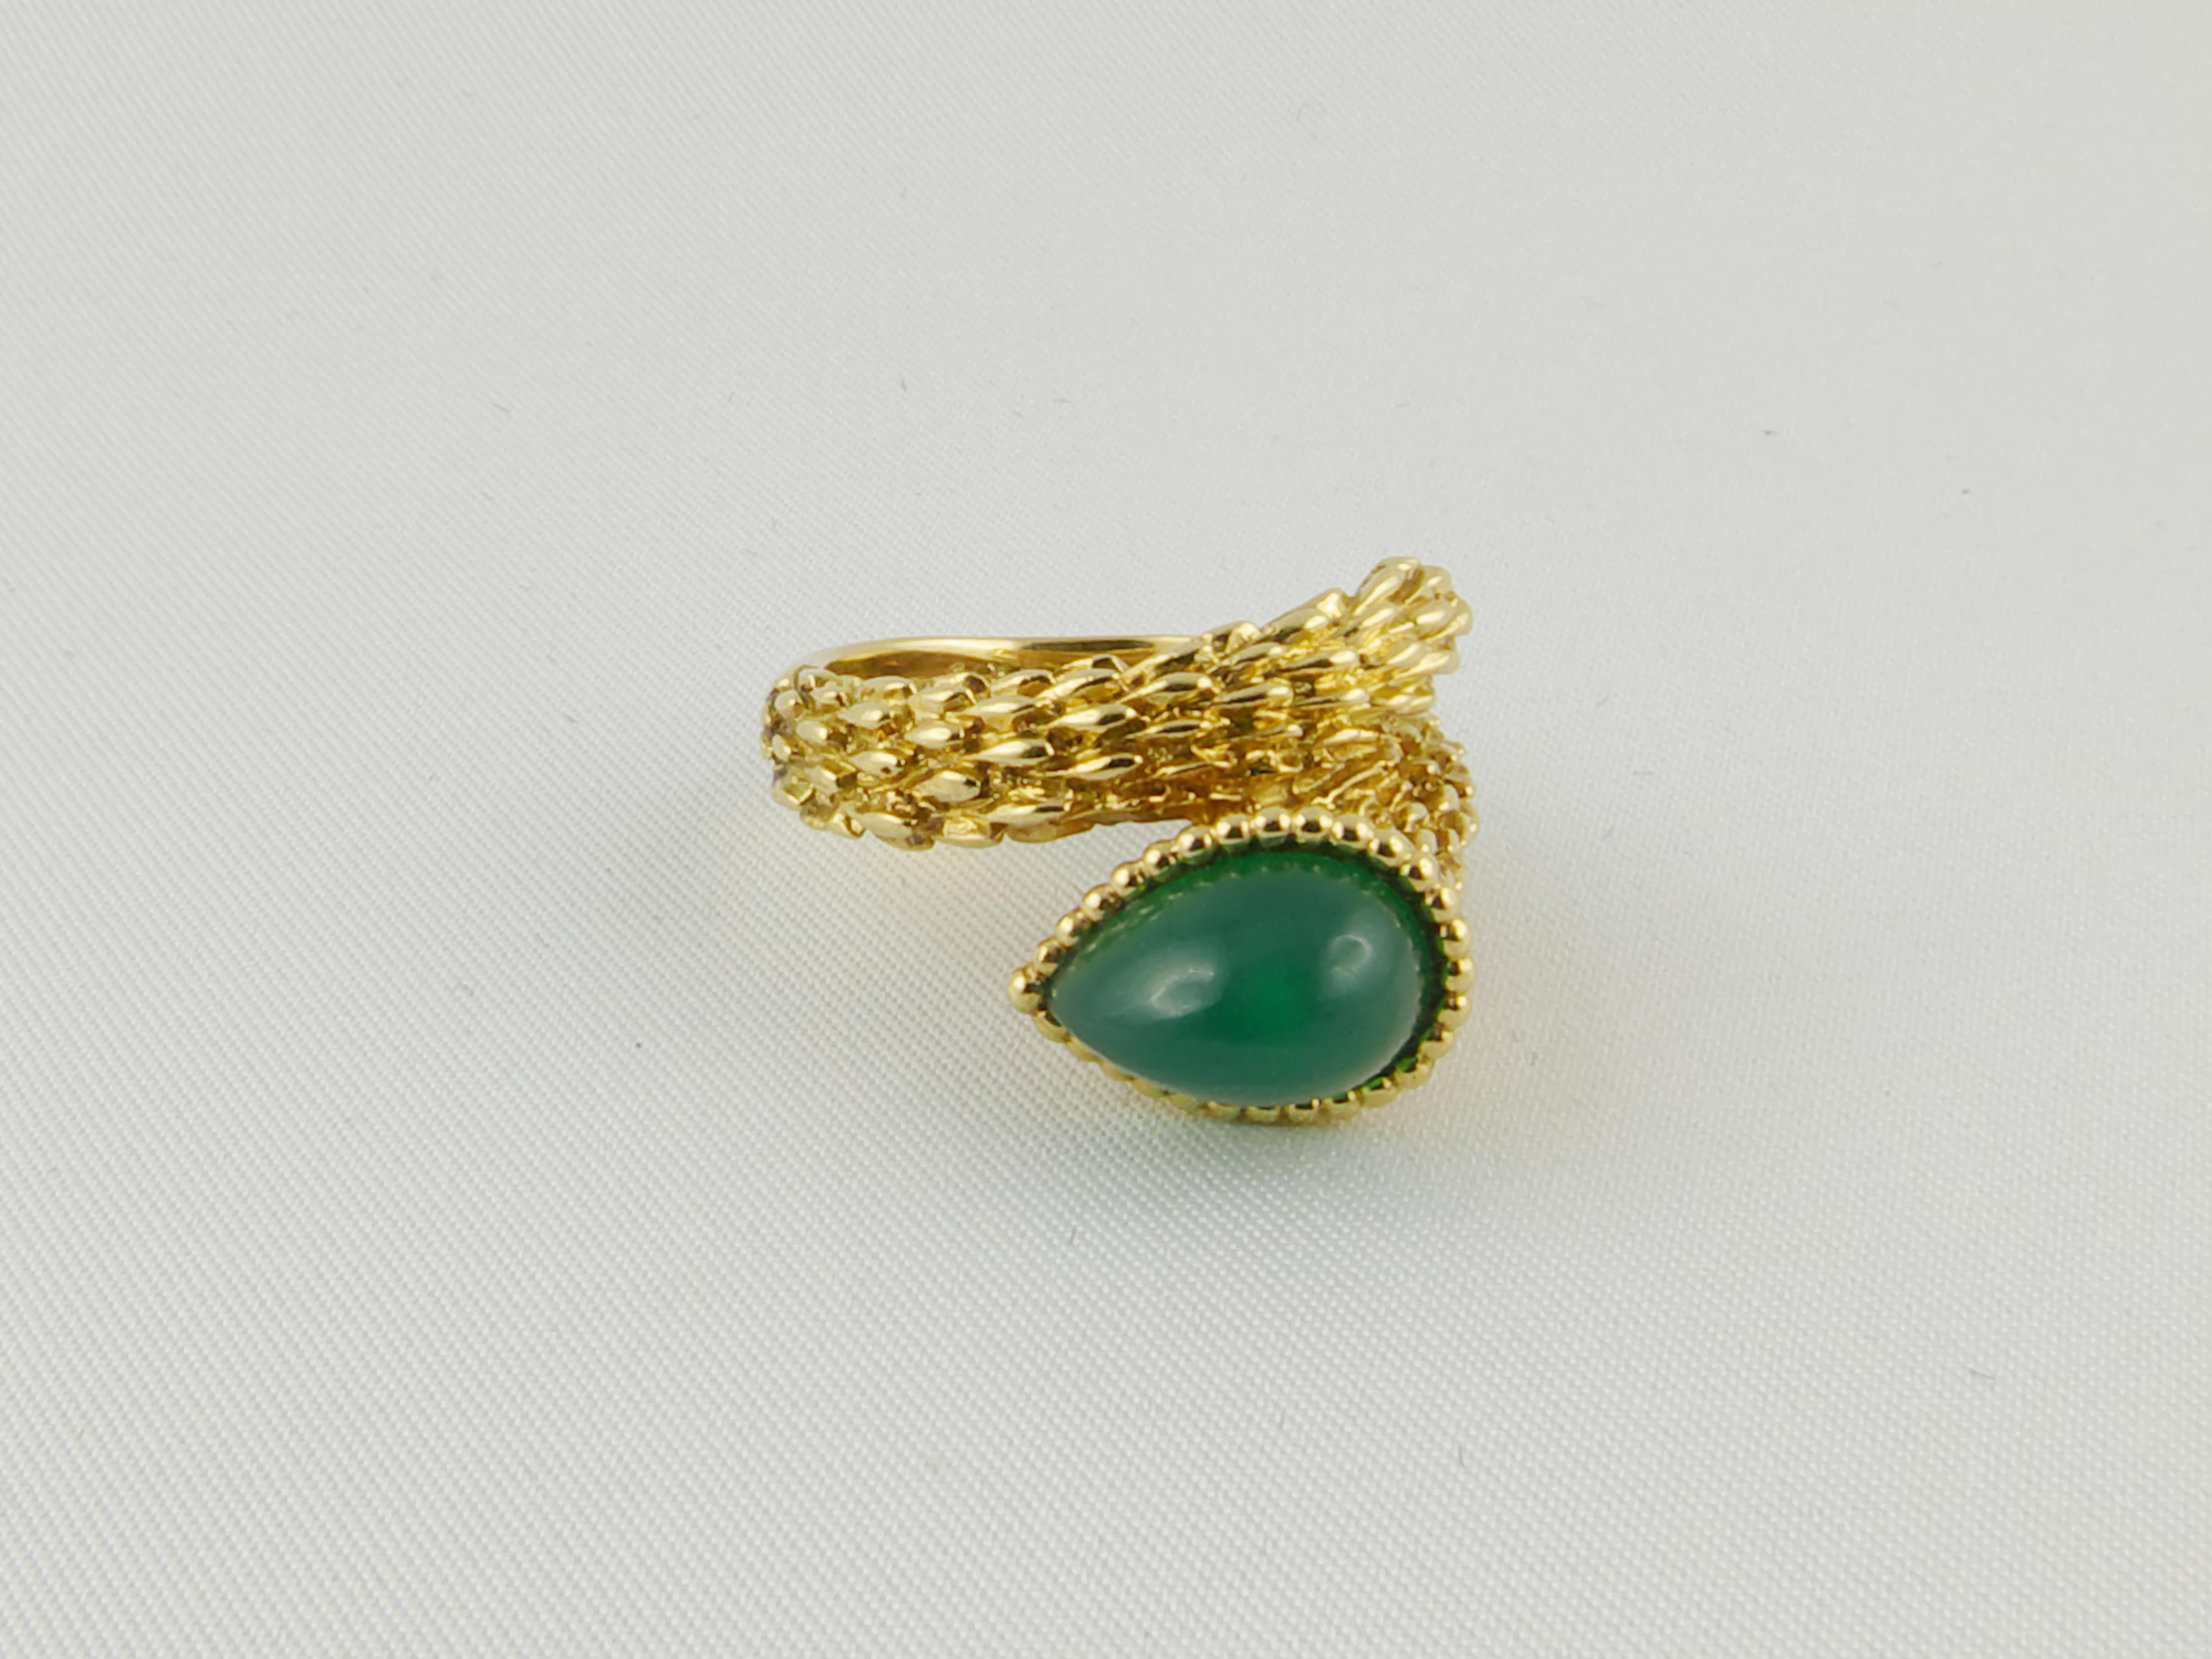 Fine and feminine, this Serpent Bohème ring is set in 18 karat  textured Yellow Gold  with a Chrysophrase pear-shaped cabochon crowned with gold beads. Finely crafted in 1970s by French jeweler Boucheron. The shank's Gold engravings have been raised